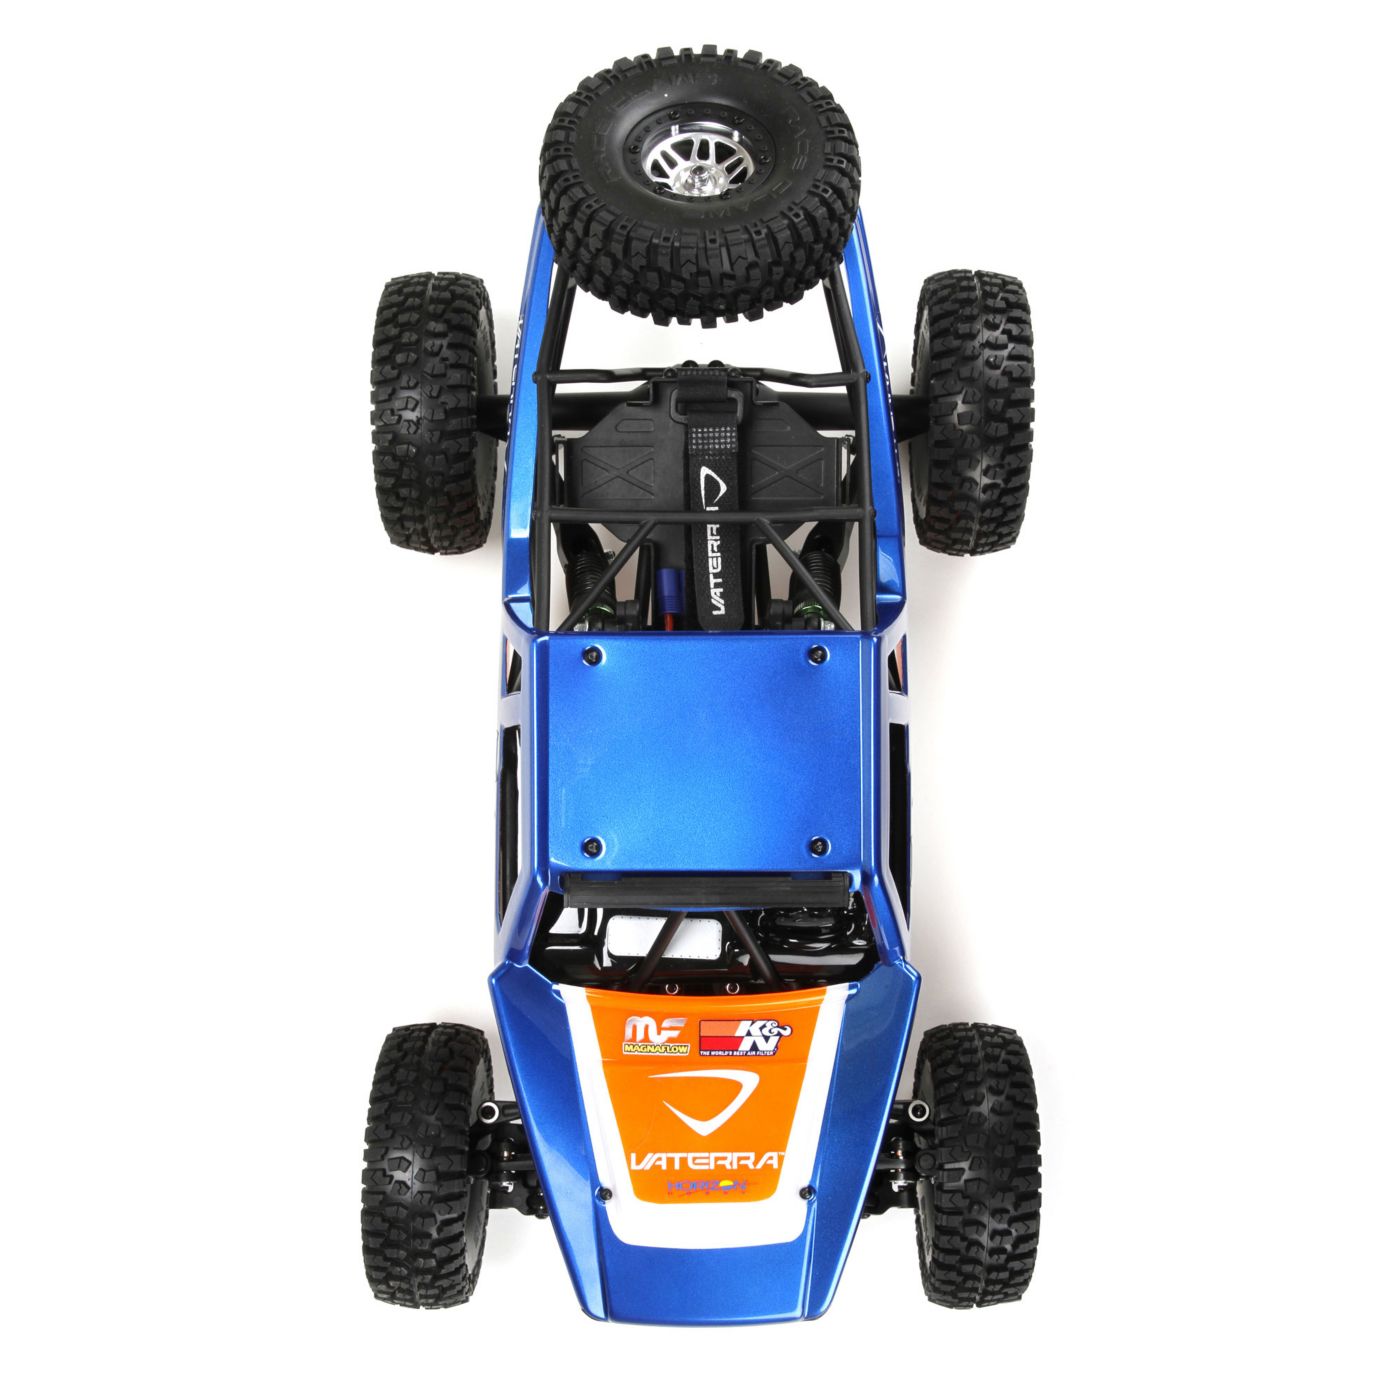   1/10 - Twin Hammers DT 1.9 RTR (     )